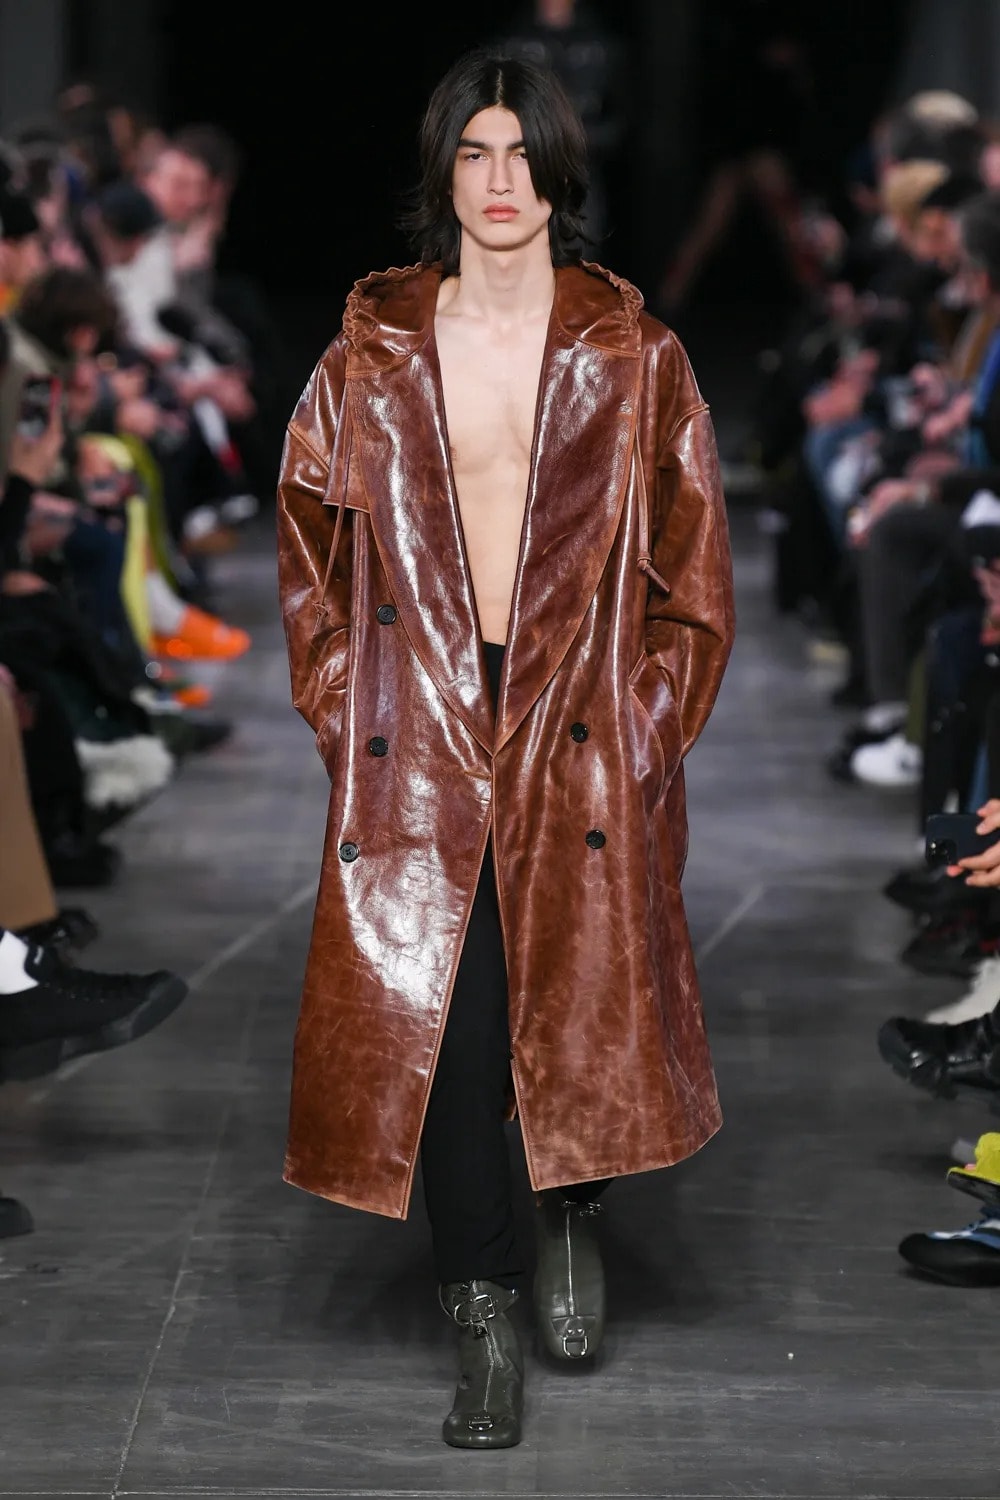 JW Anderson Fall 2023 Men's Fashion Show Review